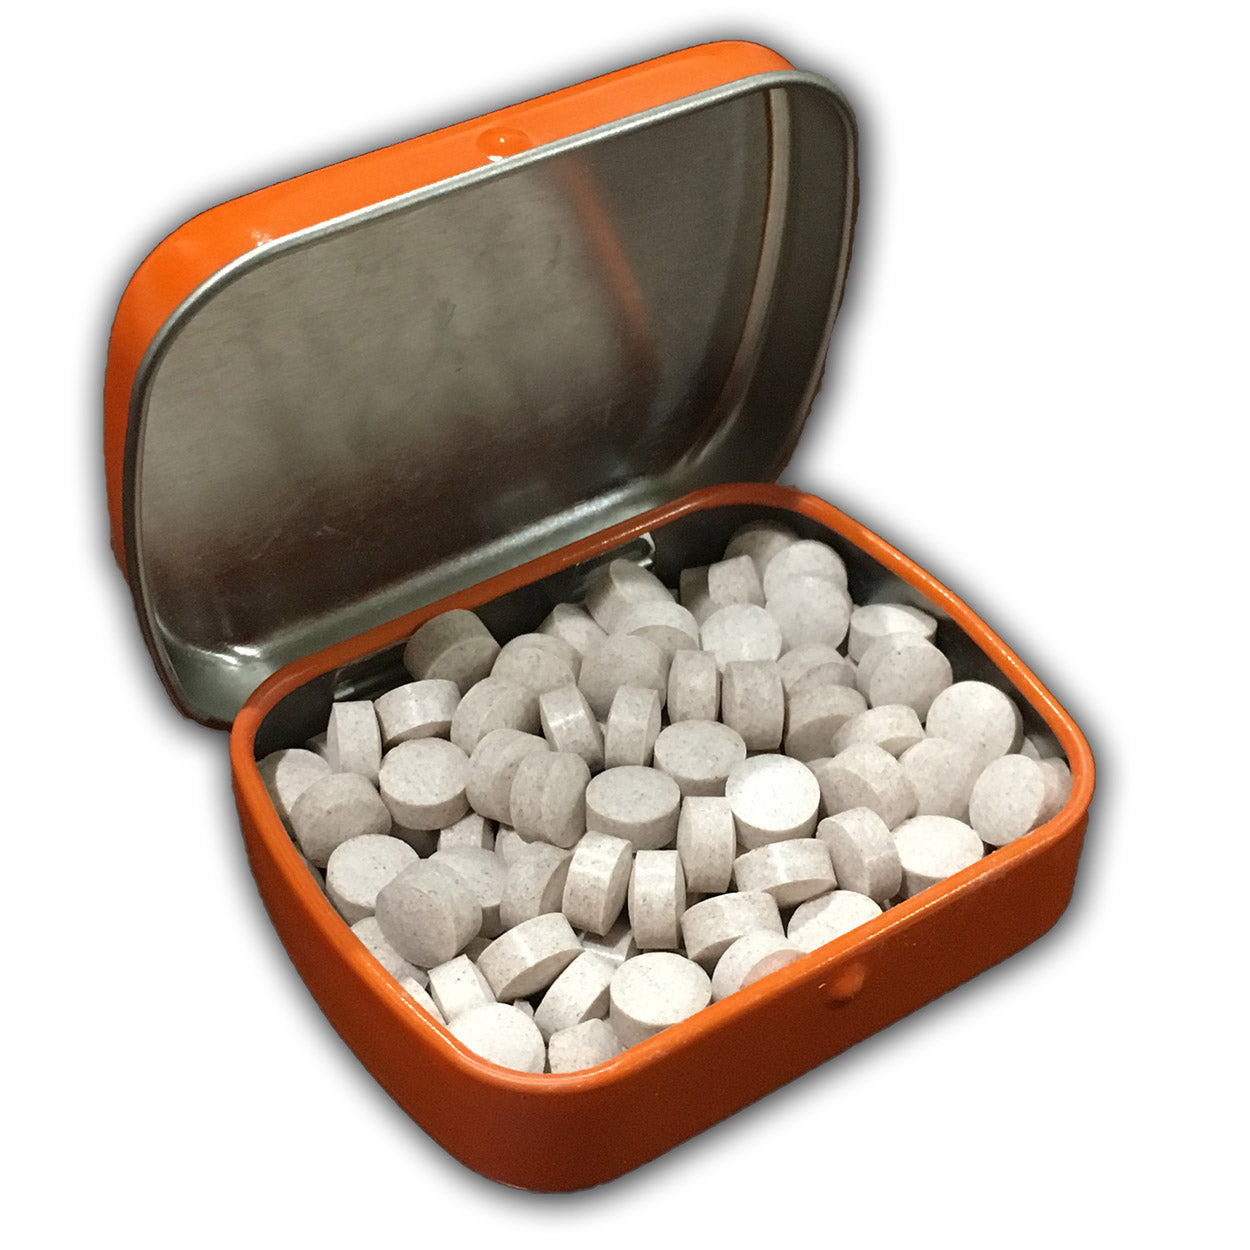  Stank Breath Mints – Funny Gag Gift for Teens Weird